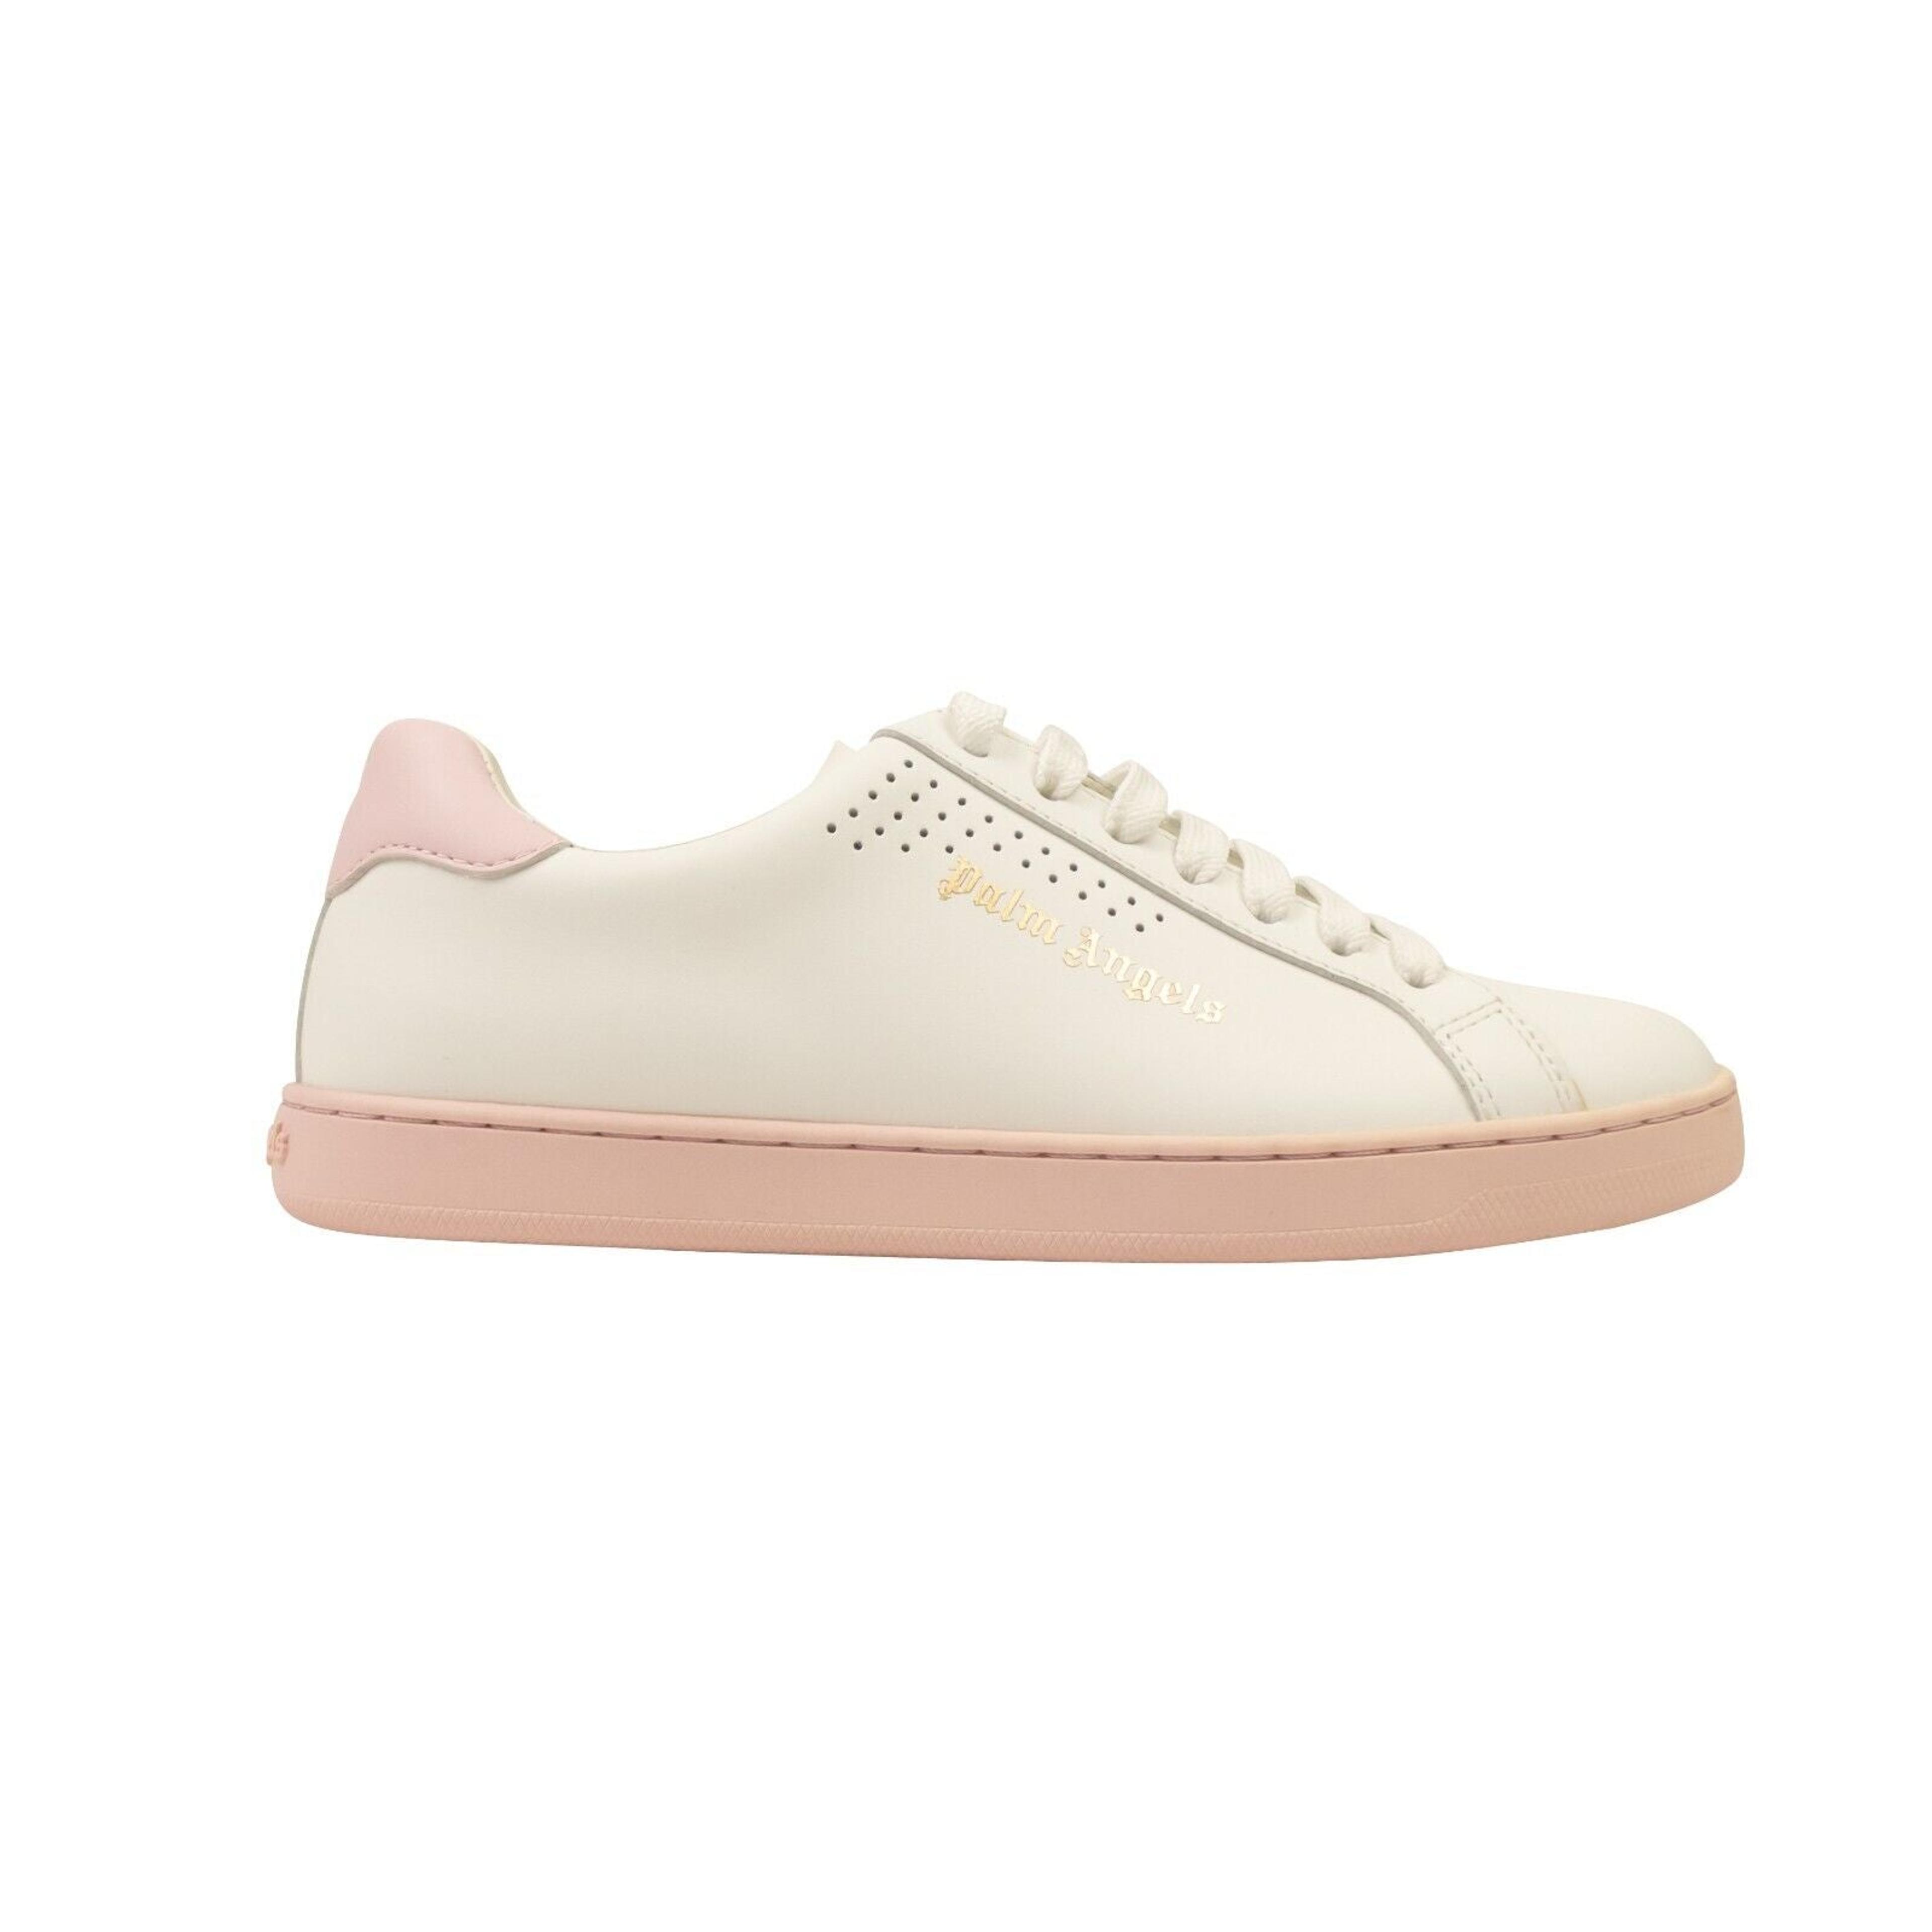 Palm Angels Palm University Low Top Sneakers - White/Fuchsia